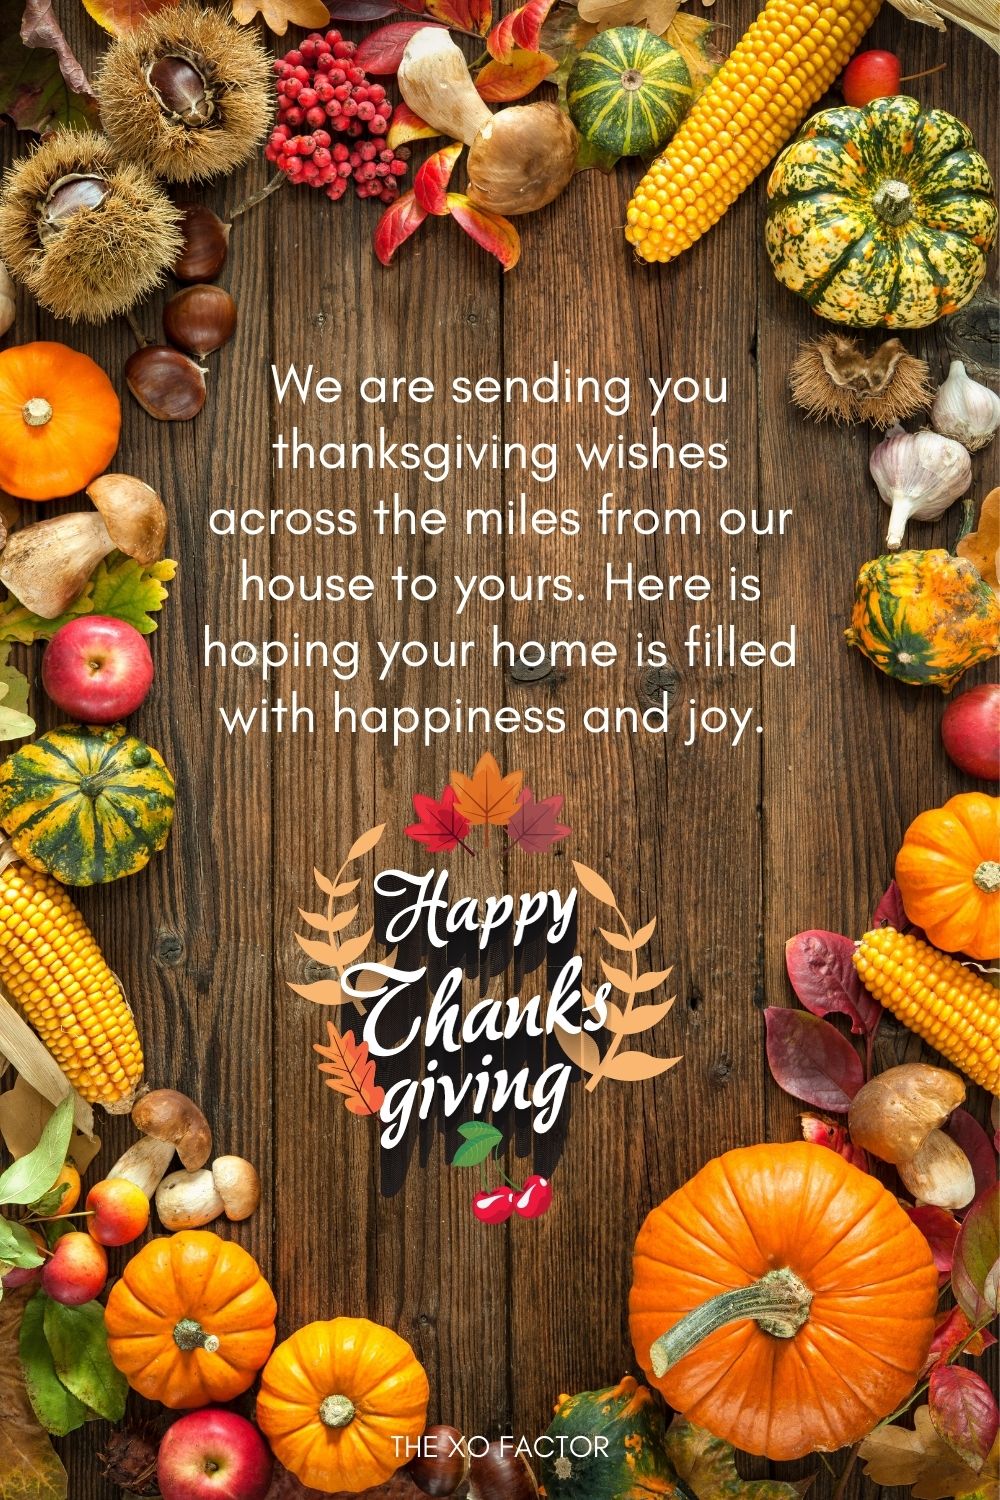 We are sending you thanksgiving wishes across the miles from our house to yours. Here is hoping your home is filled with happiness and joy.